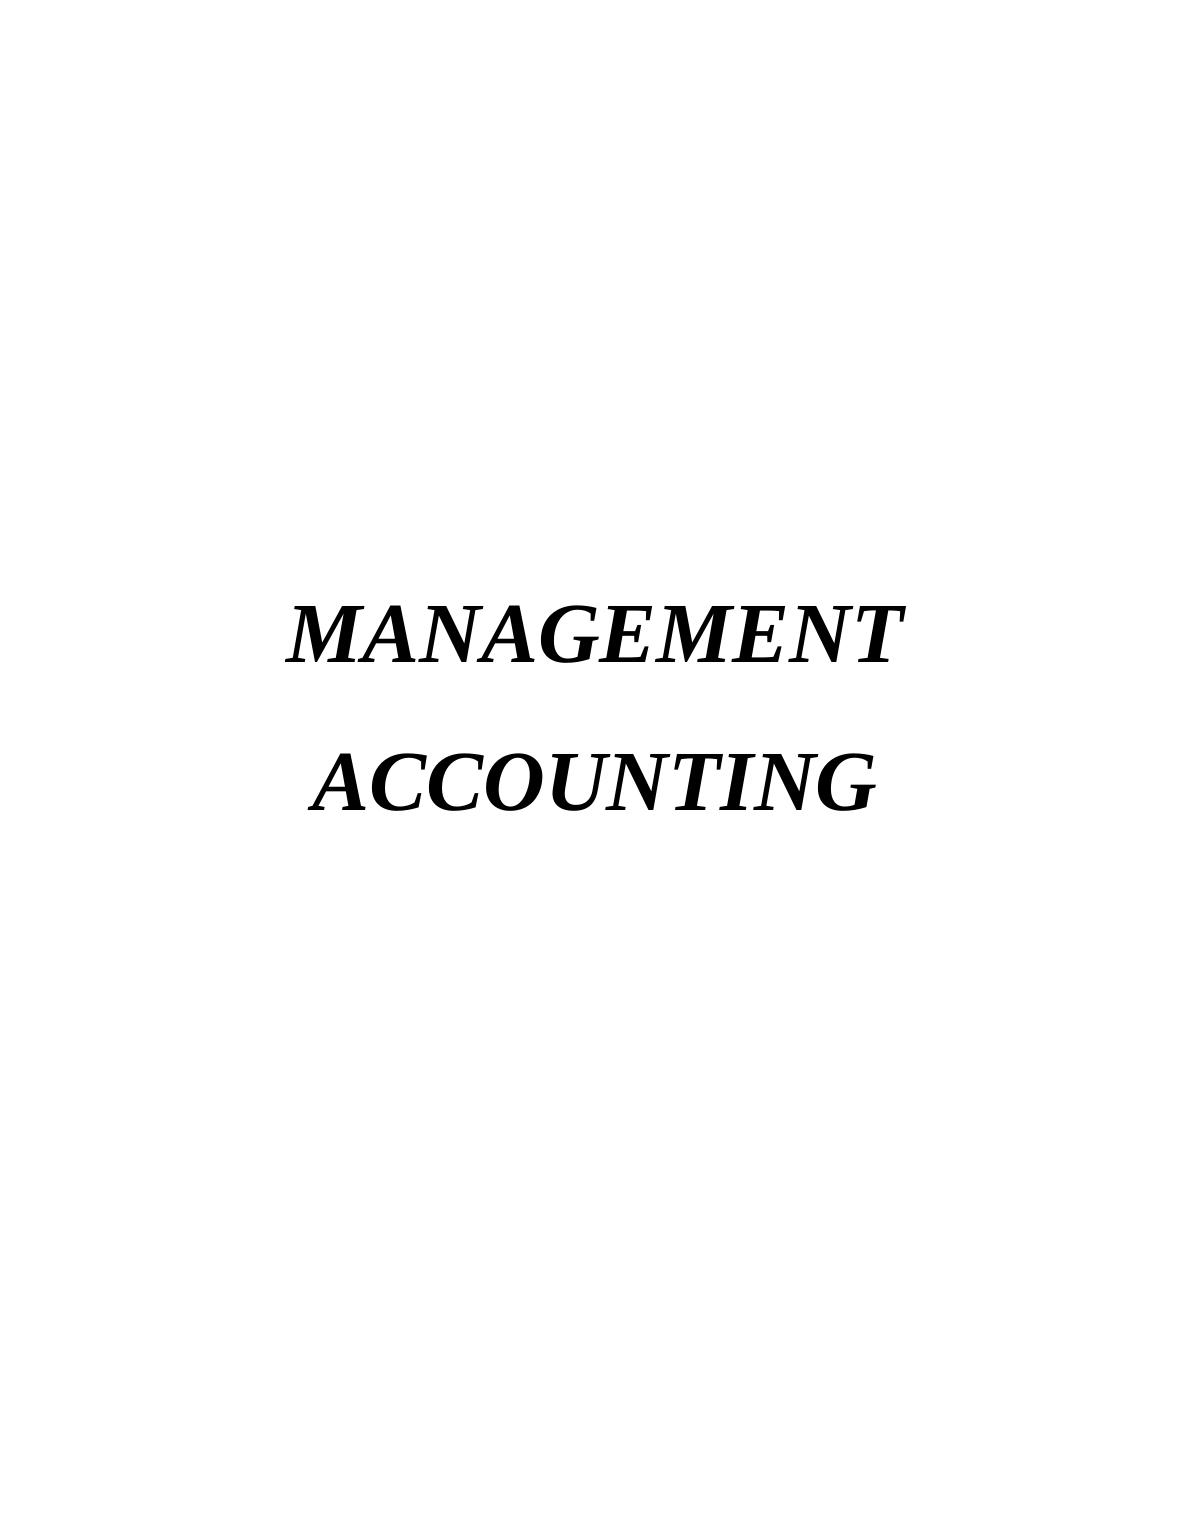 Management Accounting - Apis Limited_1